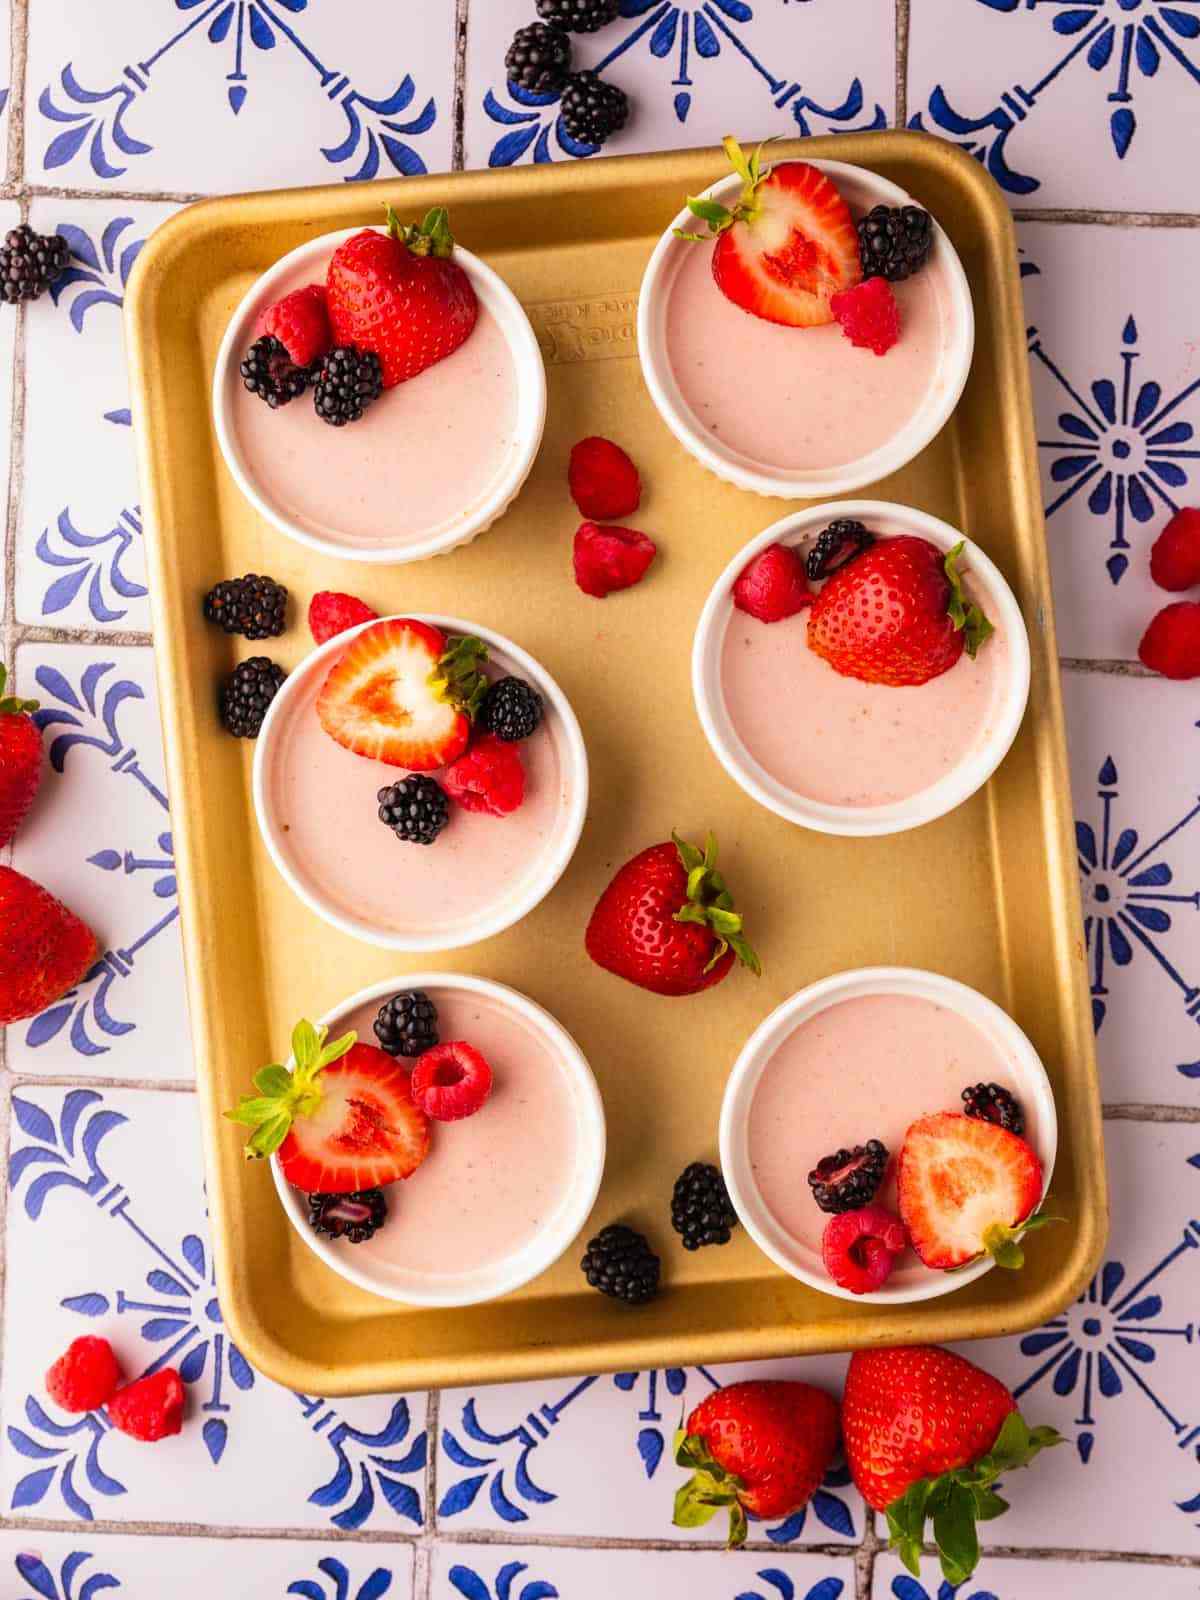 Strawberry panna cotta on a tray on a table with a pattern.